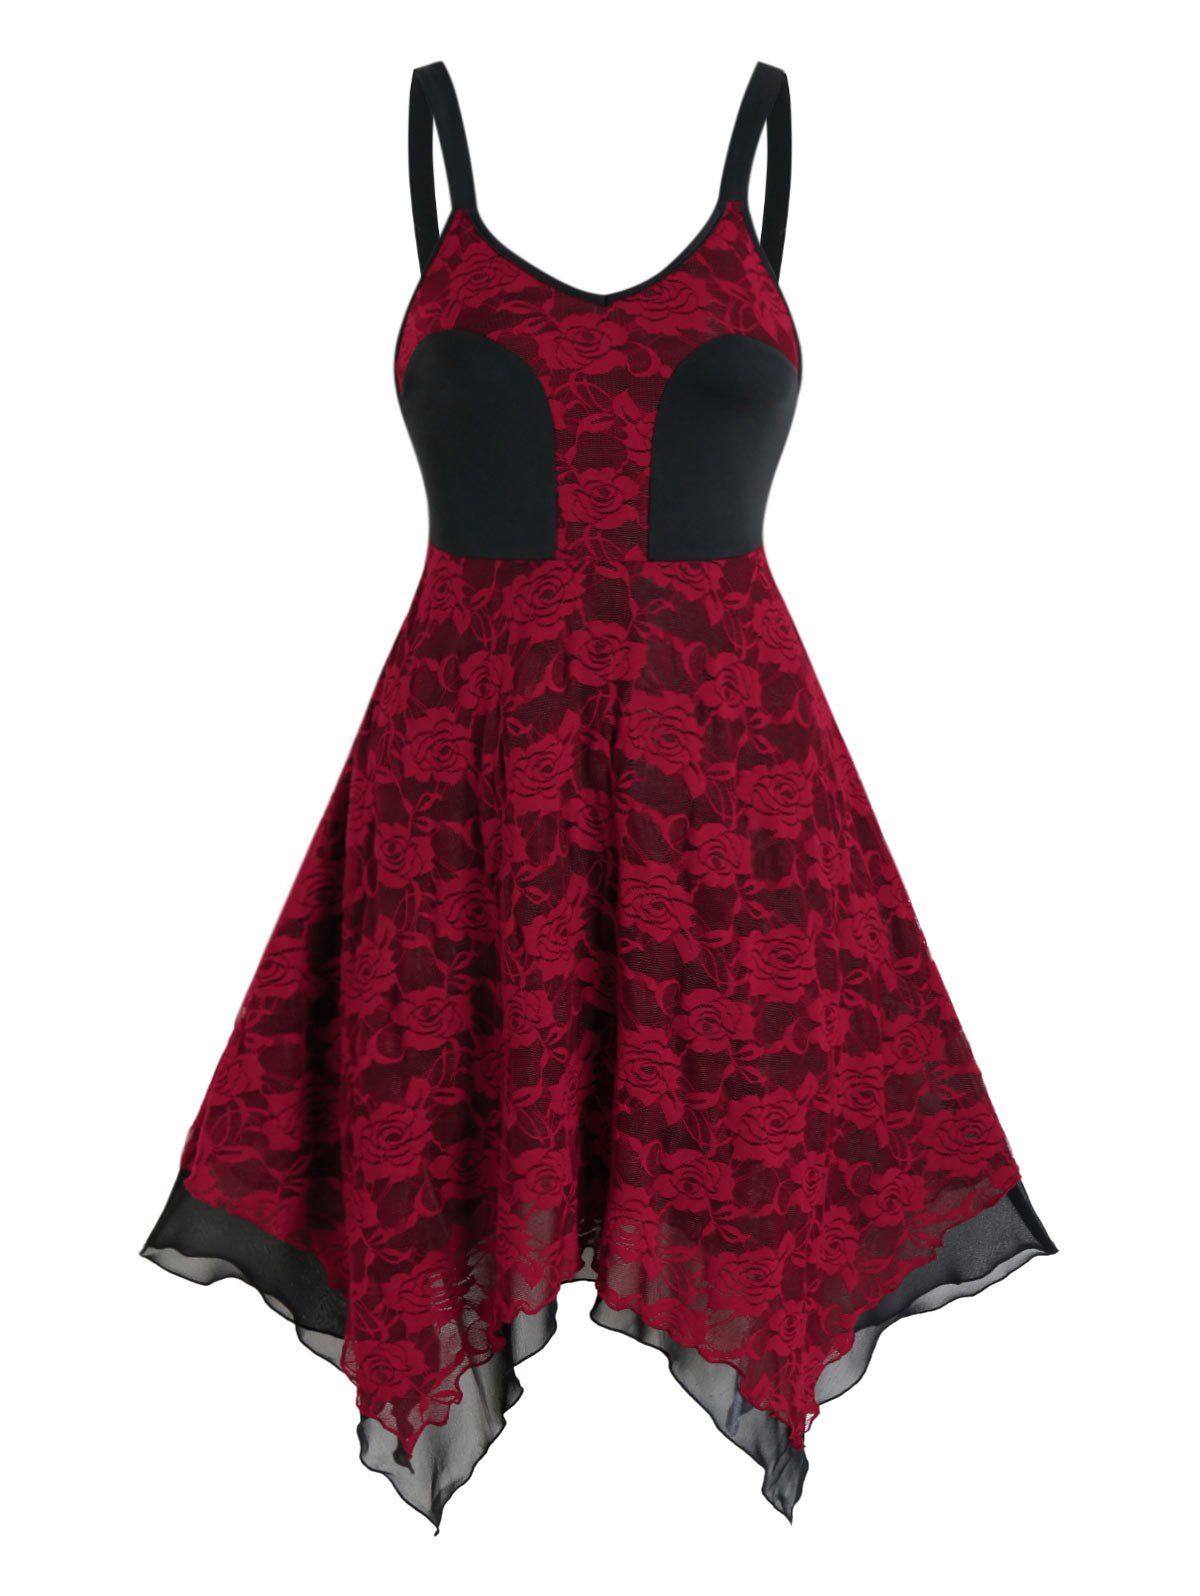 Two Tone Layered Asymmetrical Lace Cami Dress - RED XL